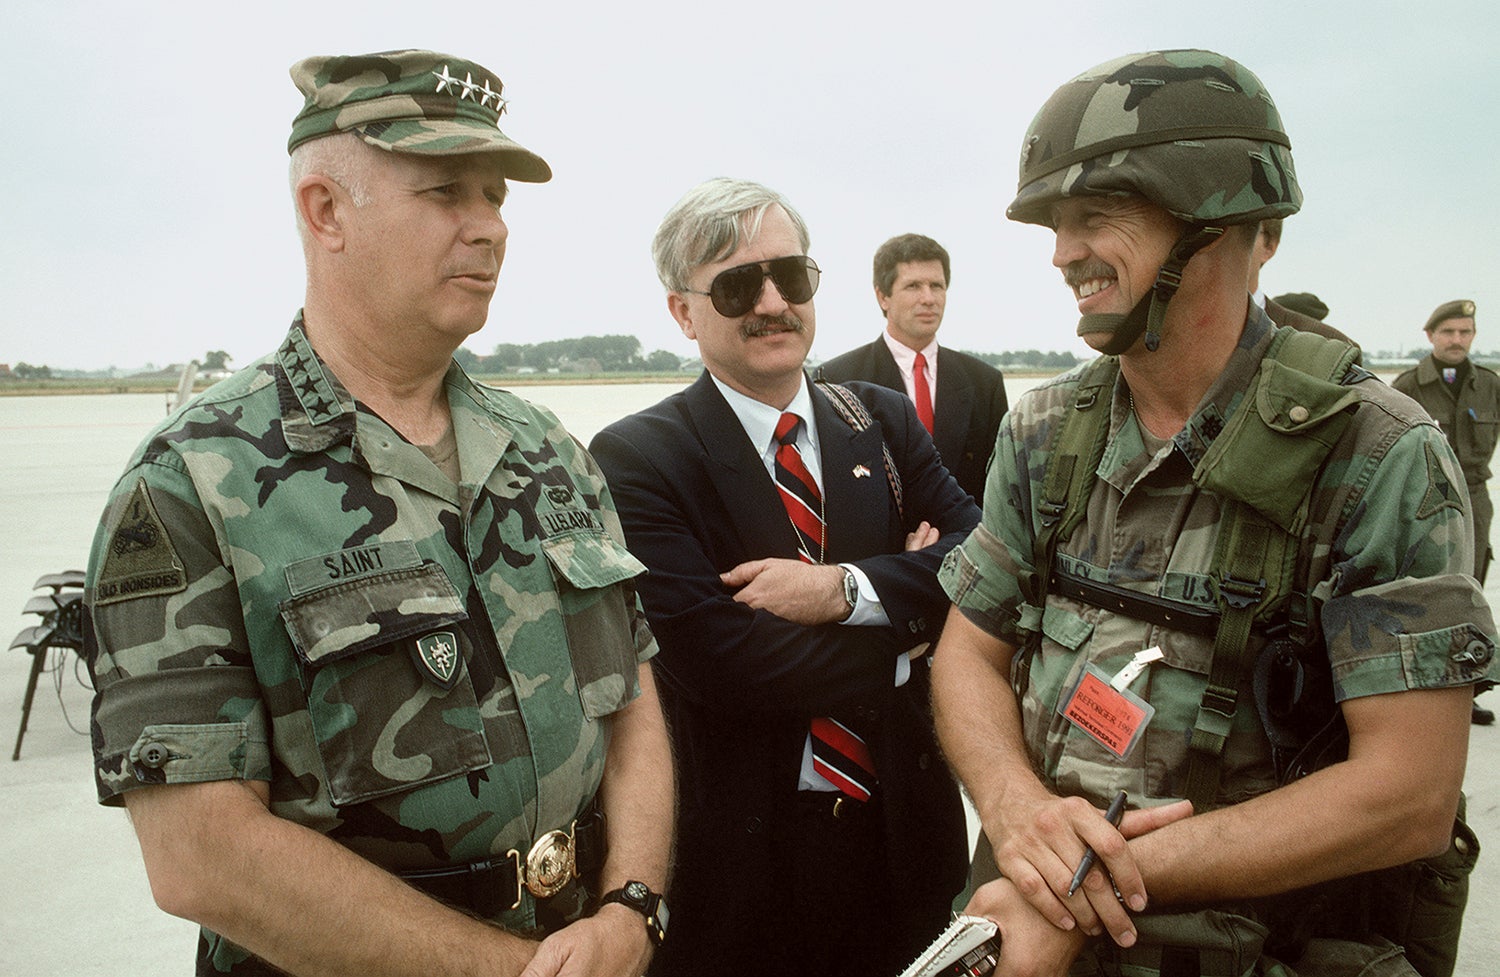 Gen. Crosbie Saint, left, then commander of U.S. Army Europe, talks with an Army journalist at the Amsterdam airport while awaiting the arrival of an Army unit that would participate in the 1991 iteration of the REFORGER exercise. (Credit: U.S. Army/Thomas Hamilton III)